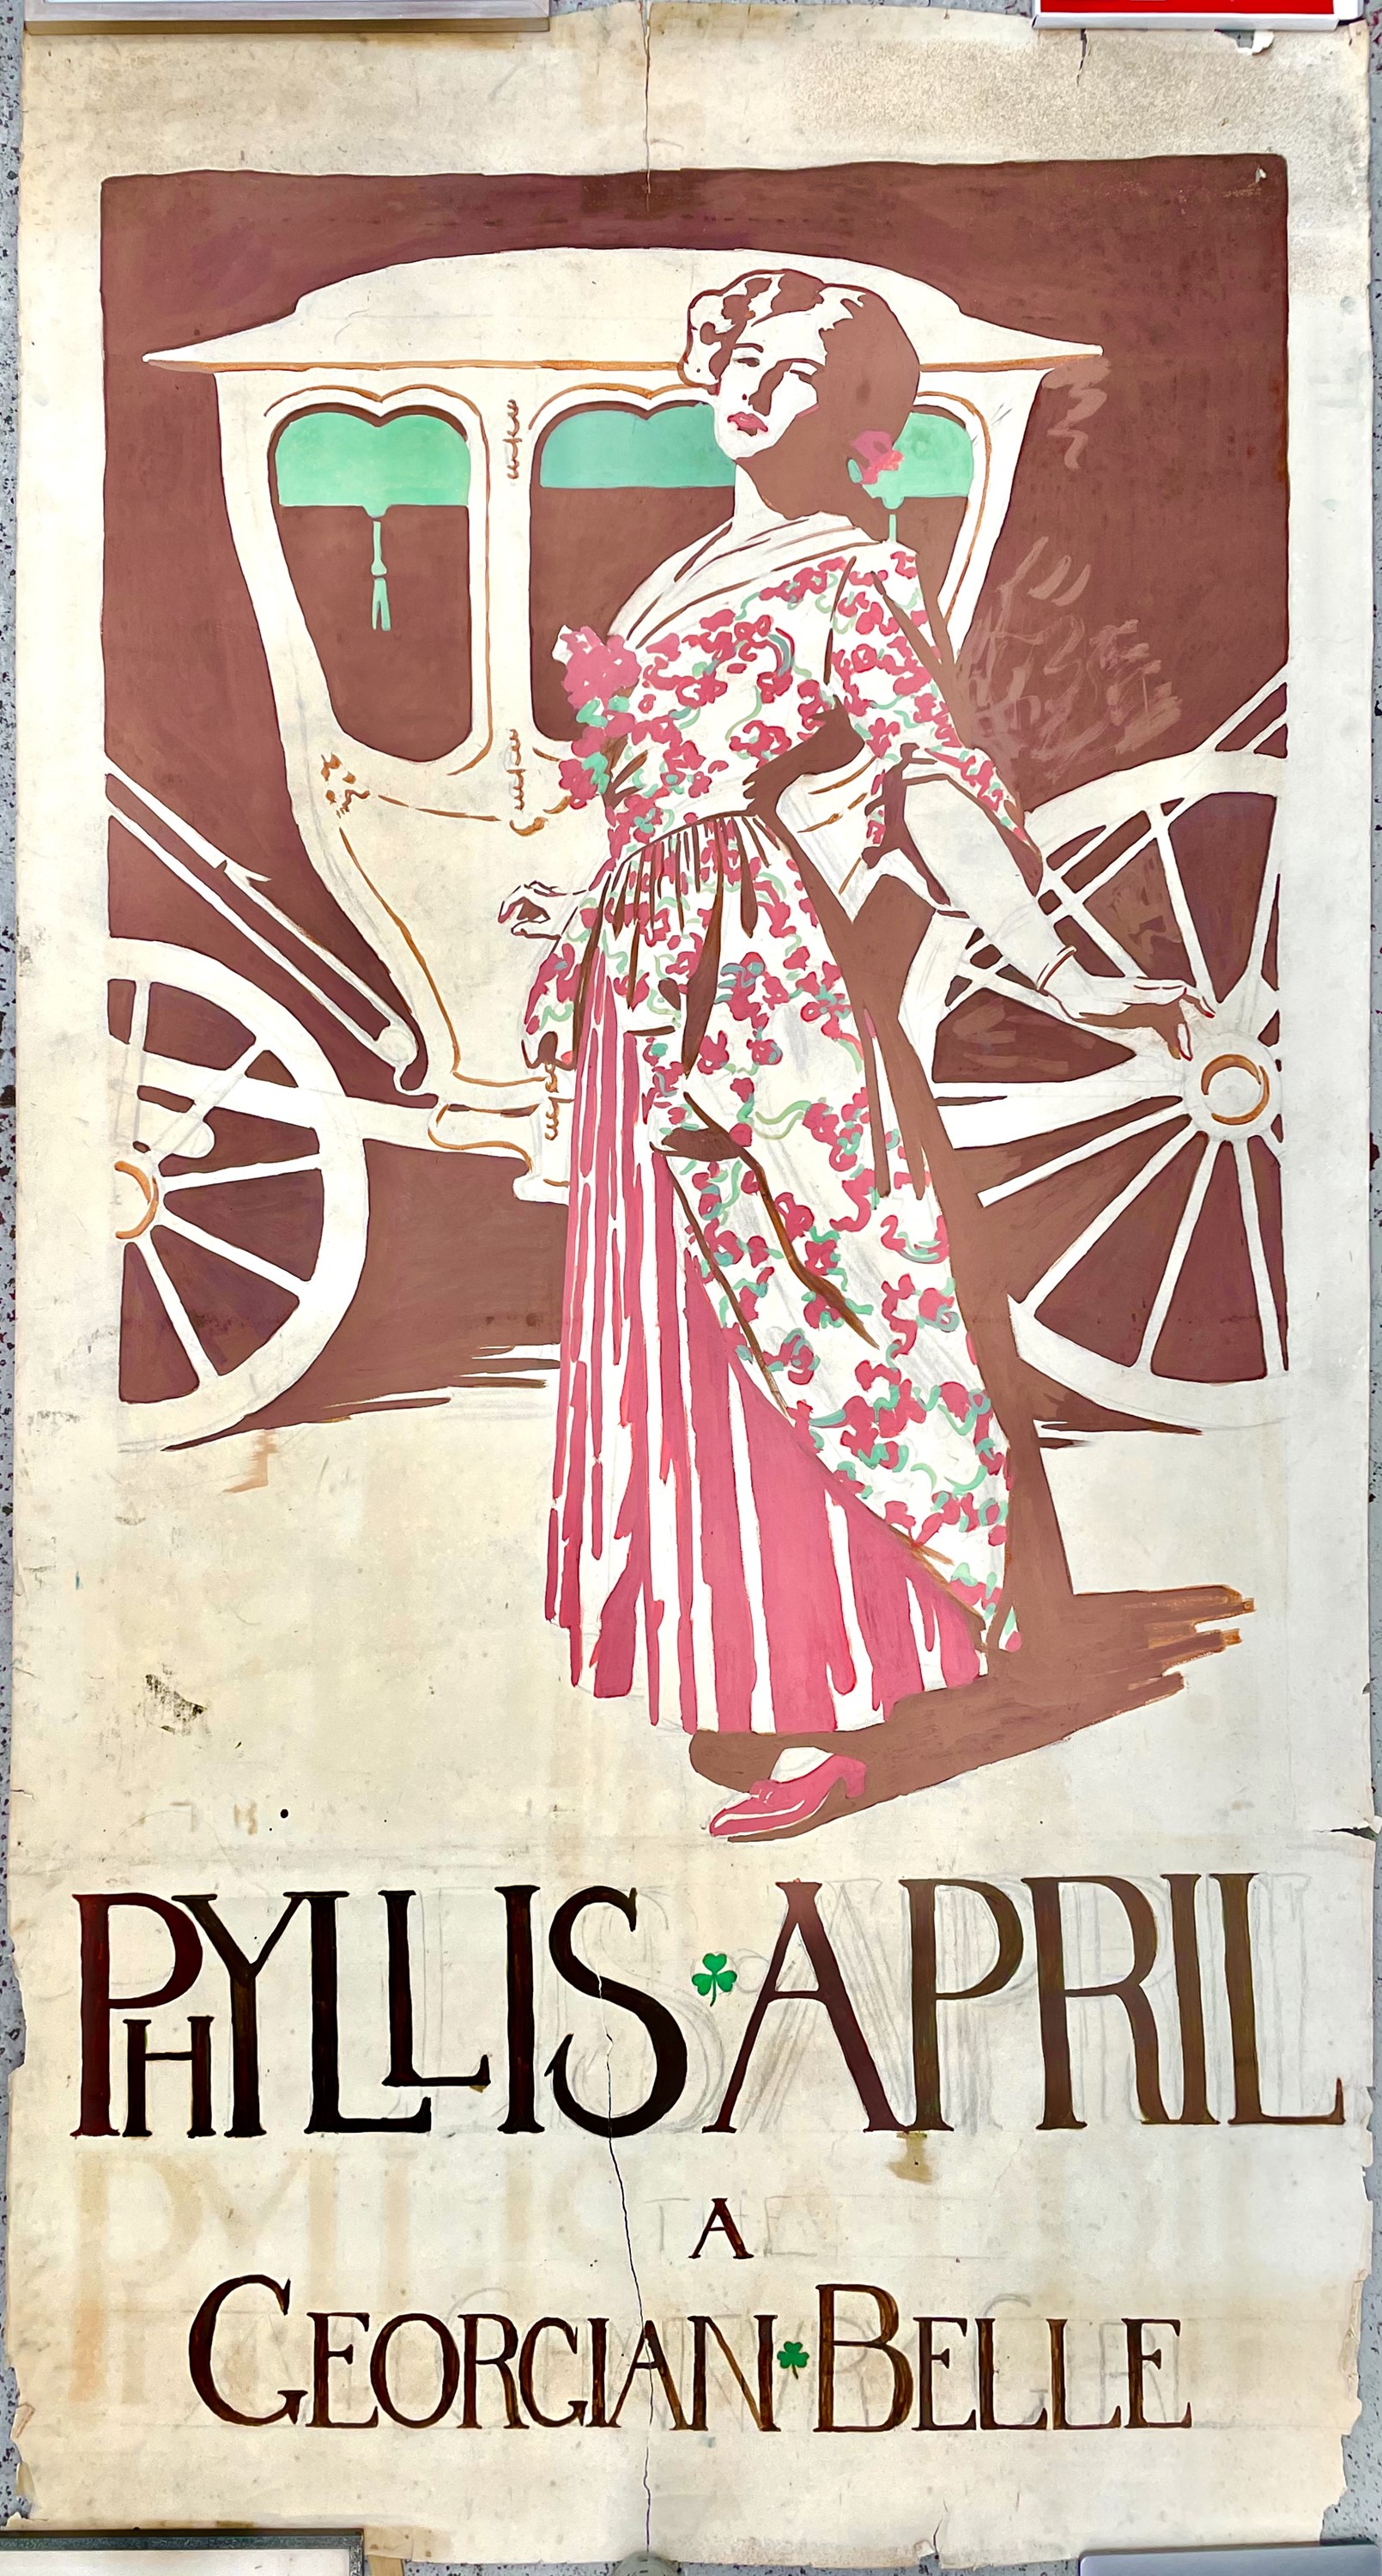 Phyllis Gotch A large gouache poster - Image 2 of 2